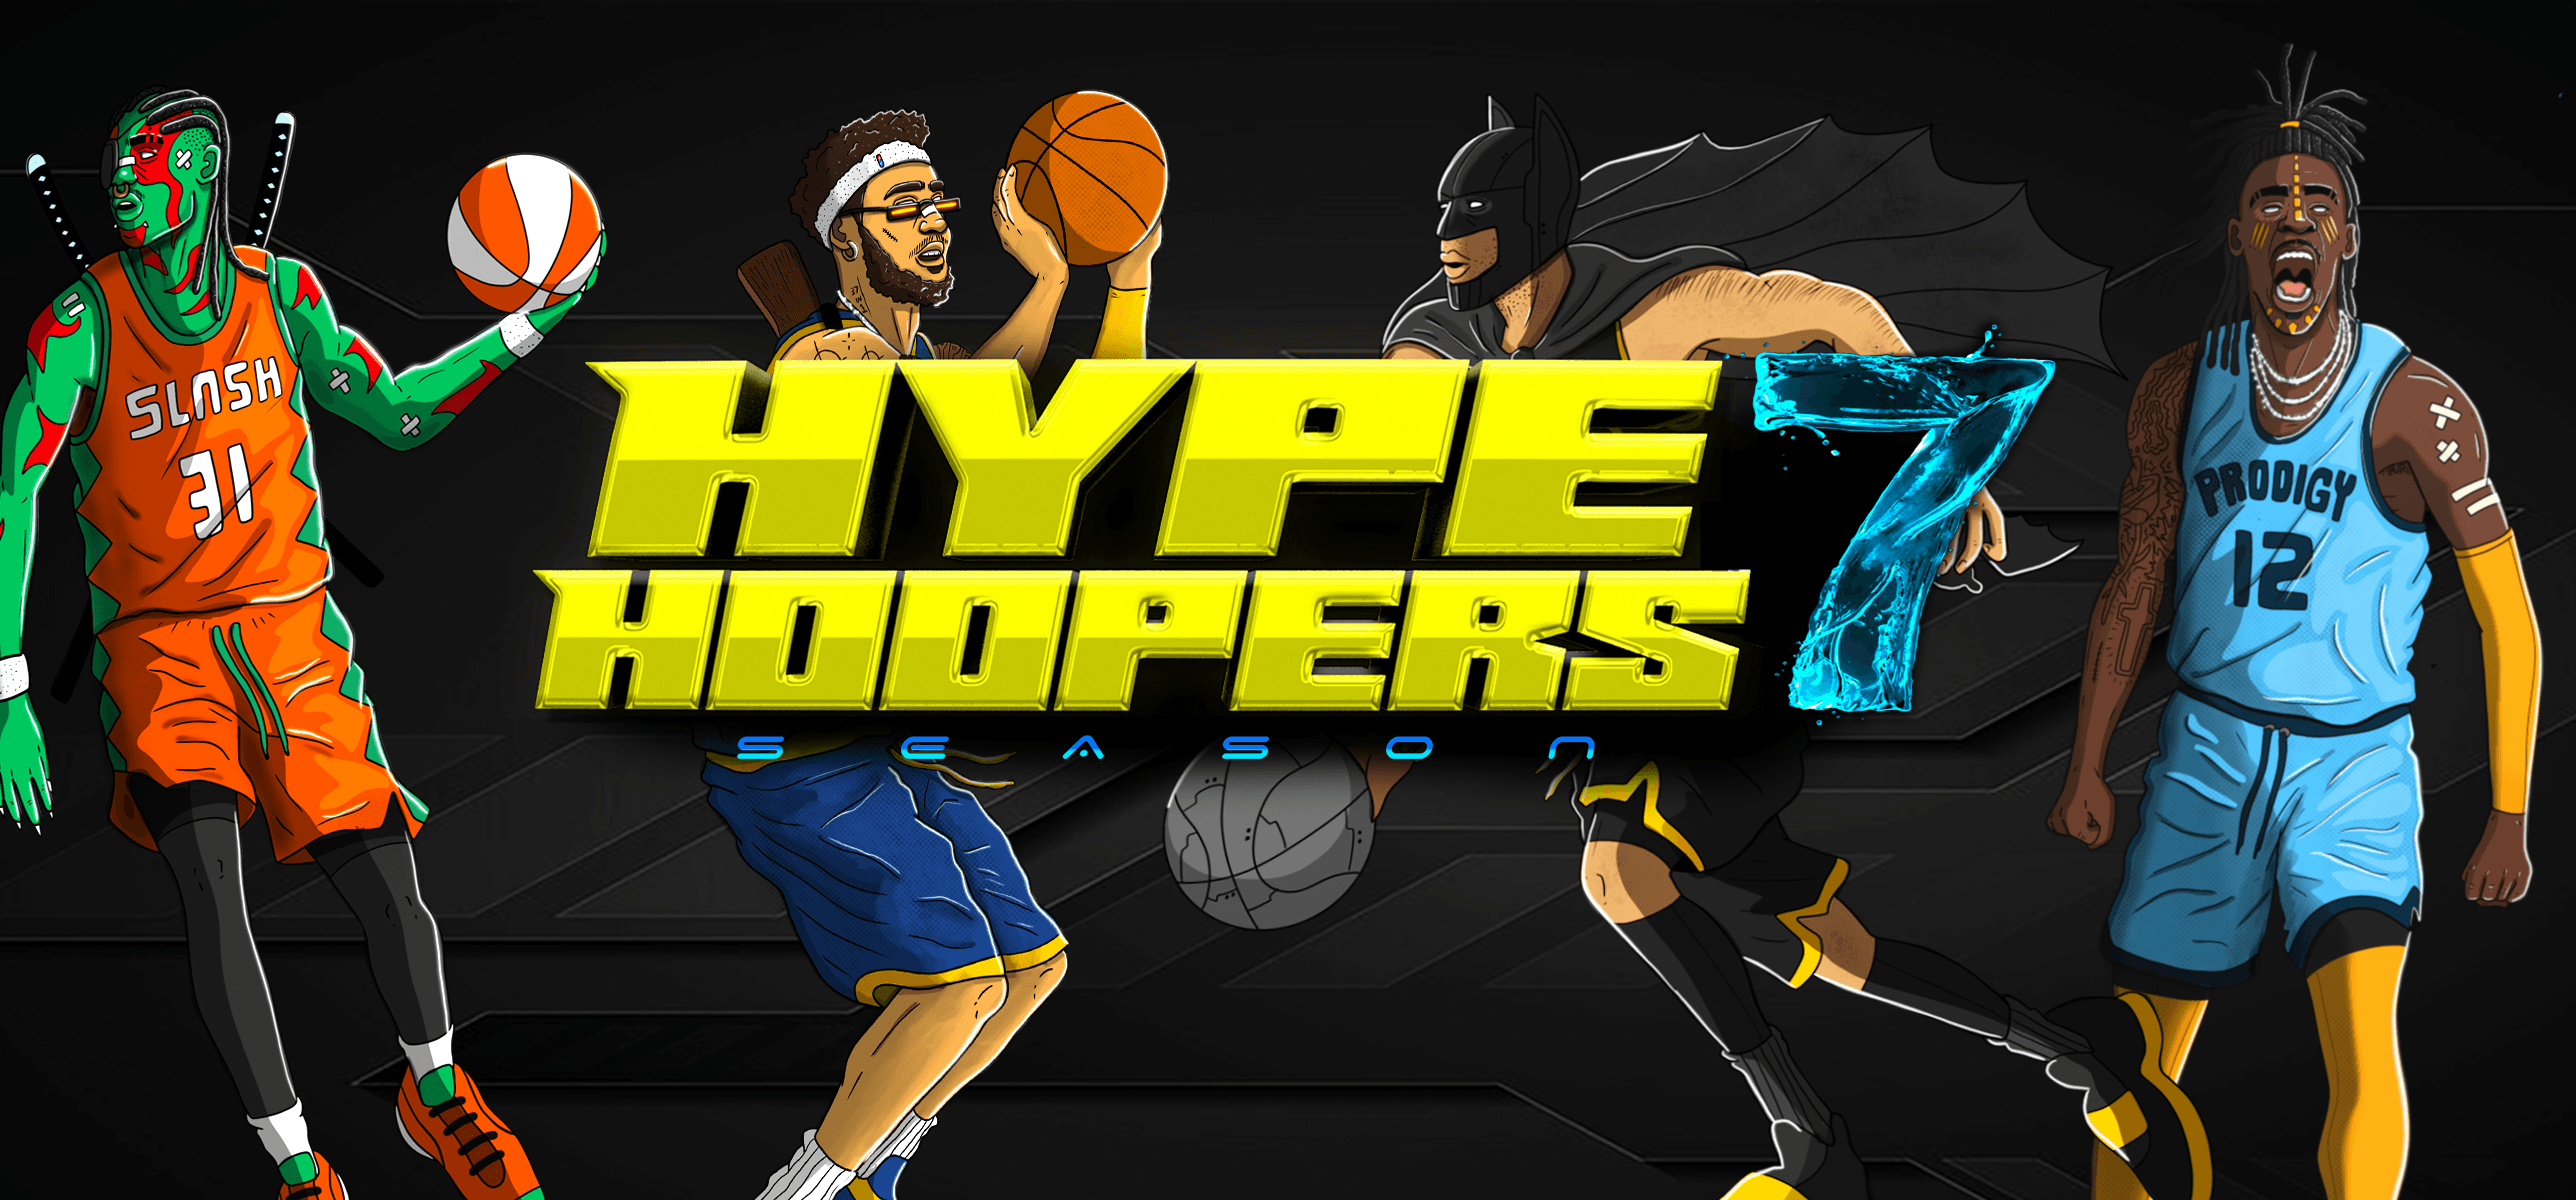 HYPE HOOPERS OFFICIAL